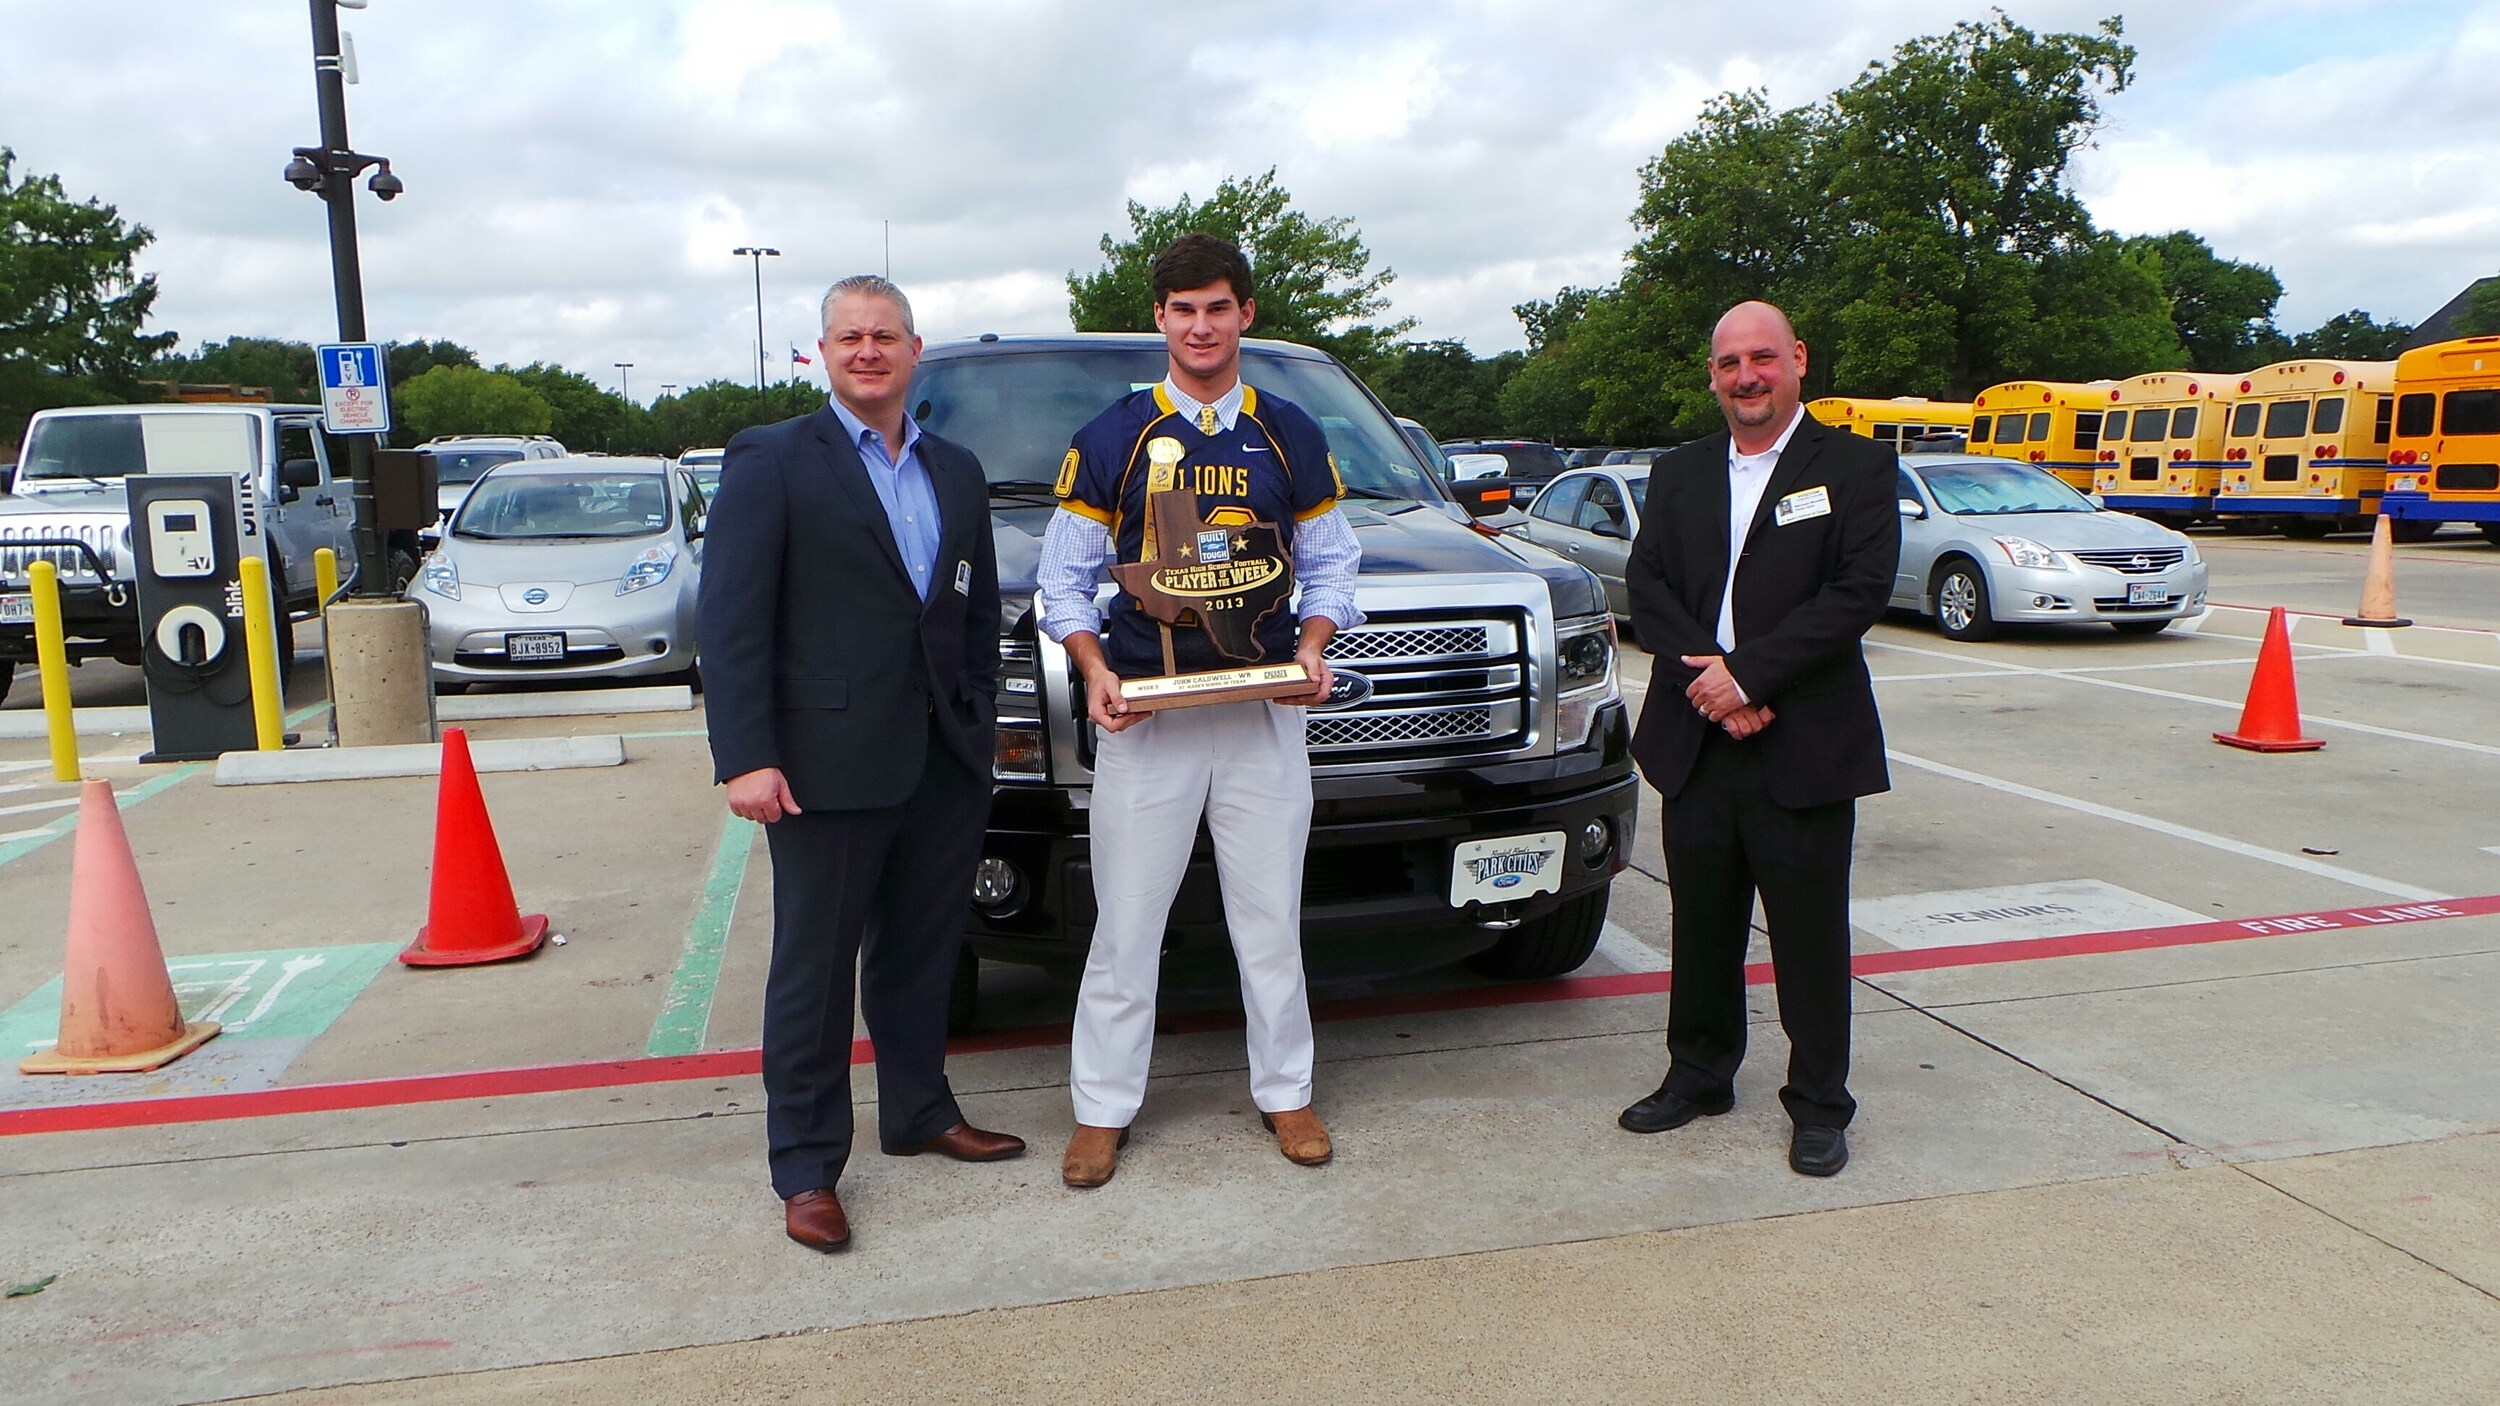 Built ford player of the week #2